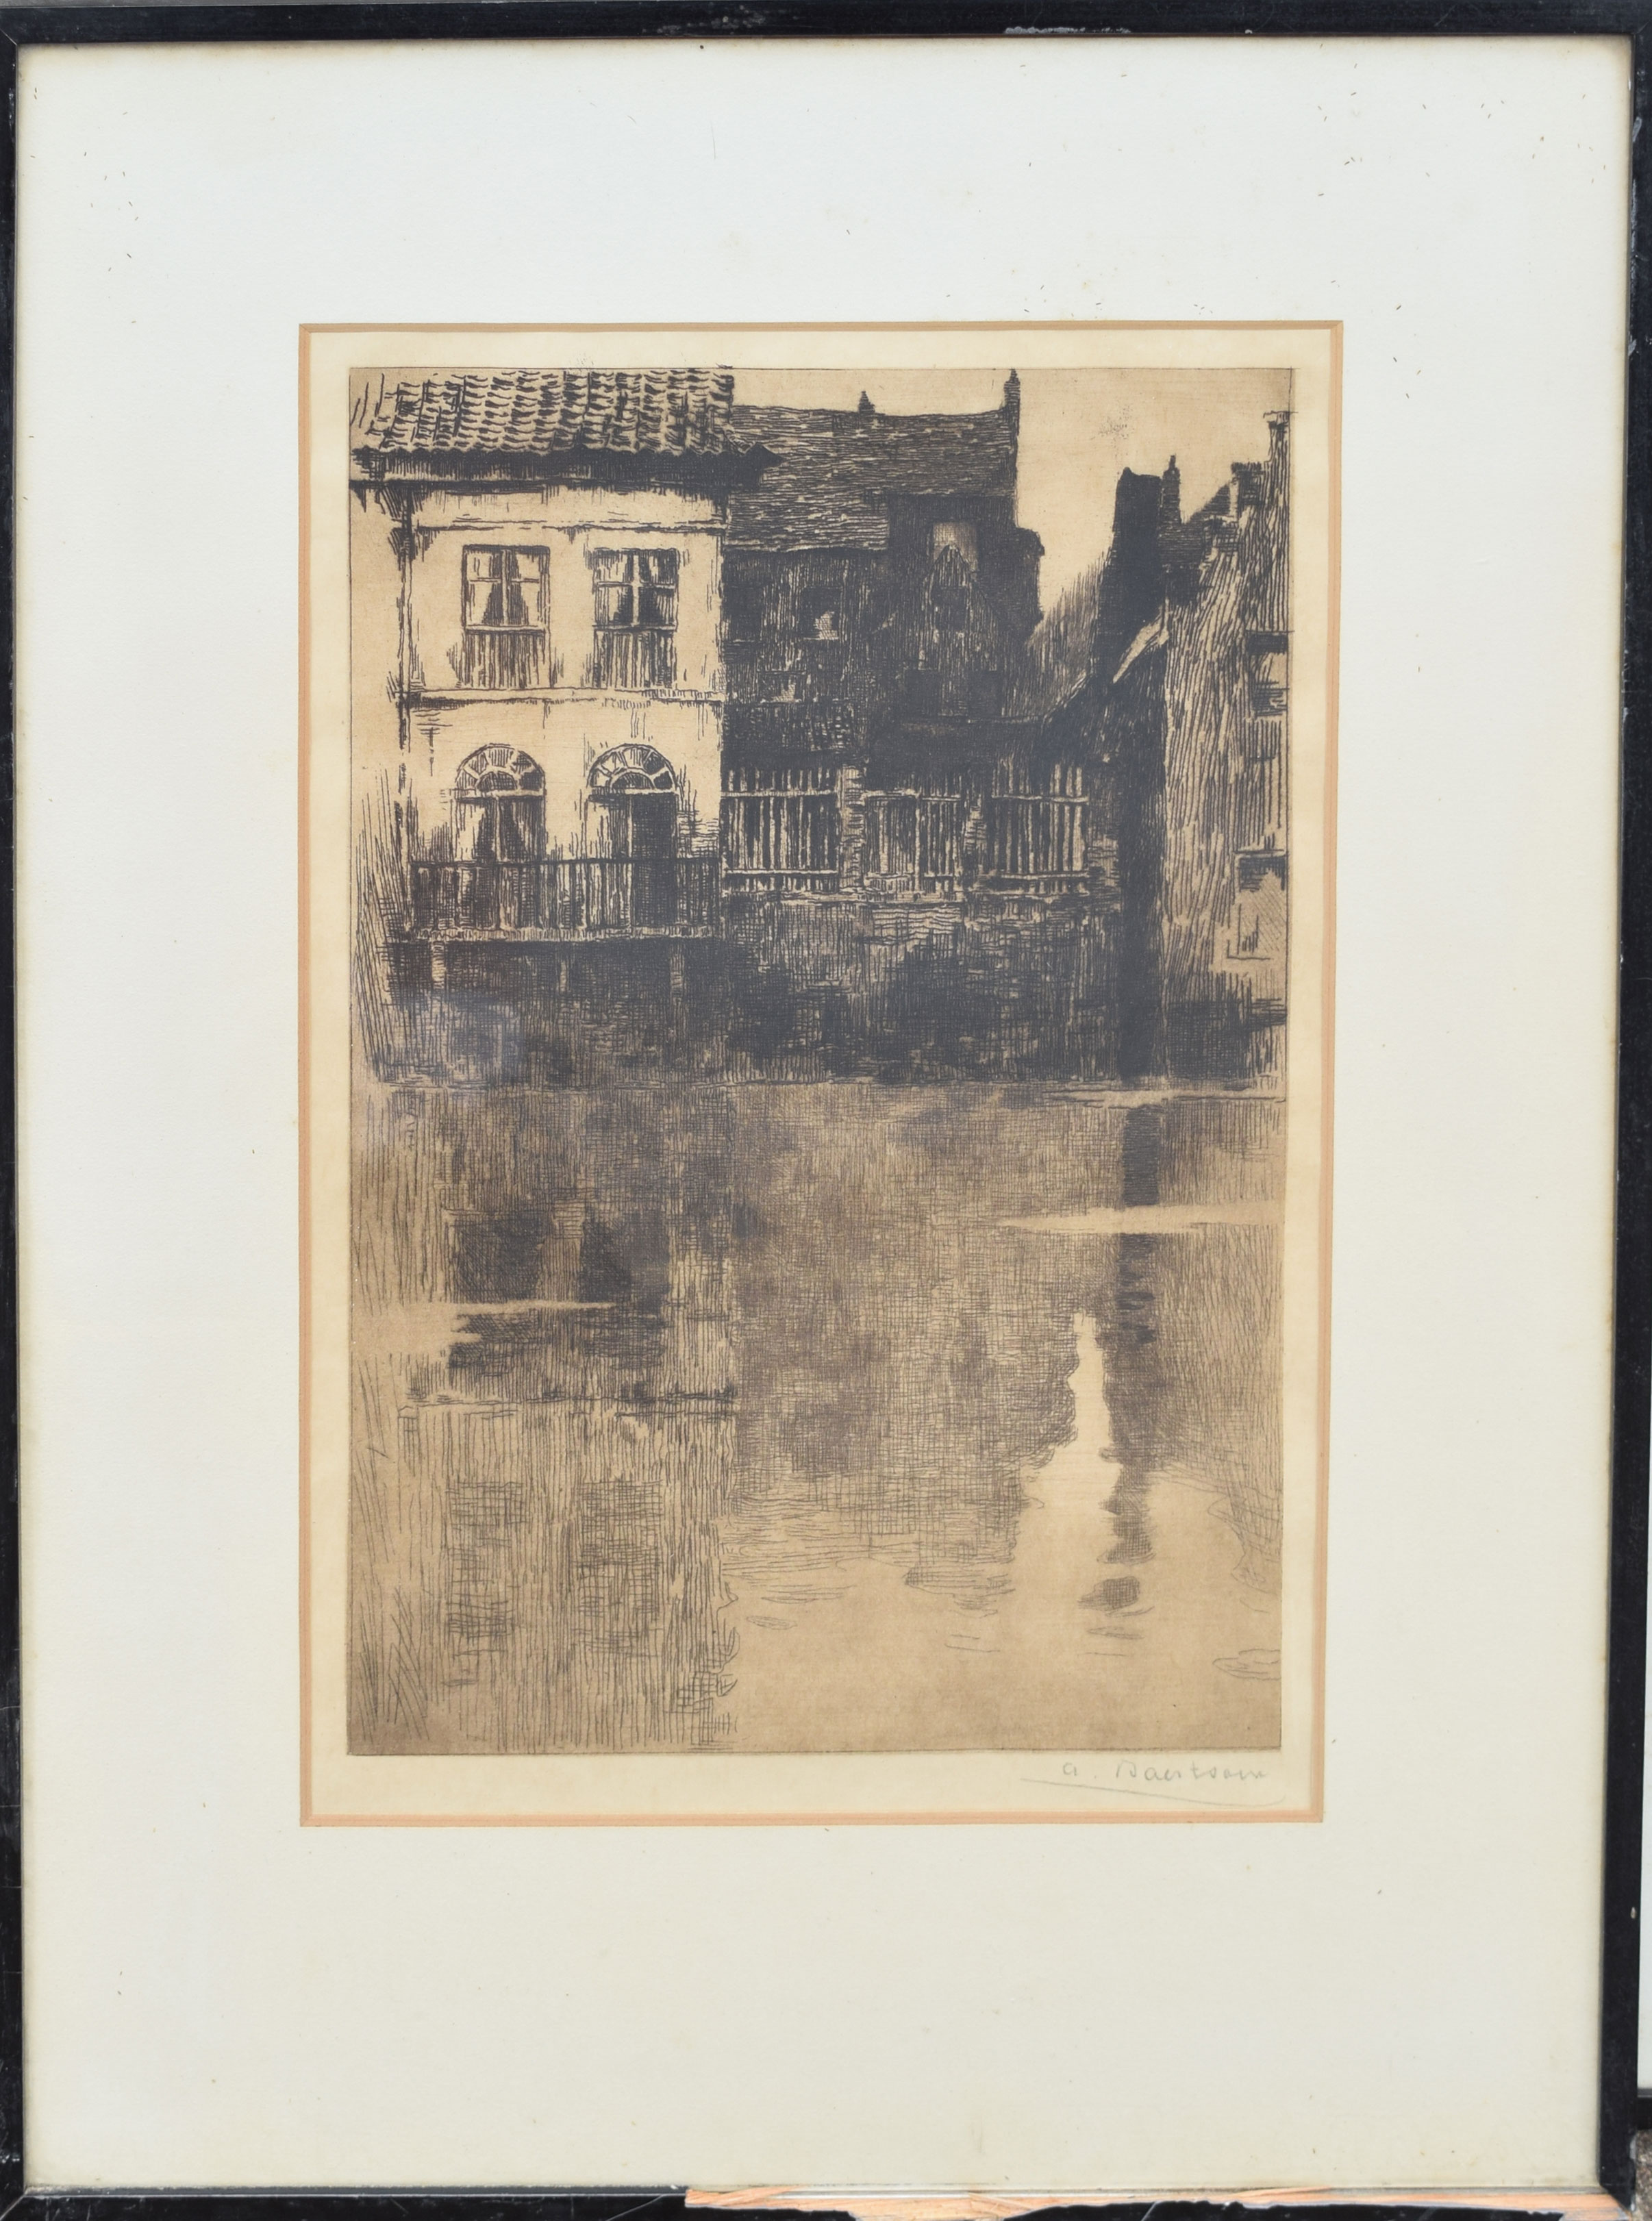 A Derkzen van Angeren, "On the Maas", black and white etching, signed in pencil to lower margin, - Image 2 of 3